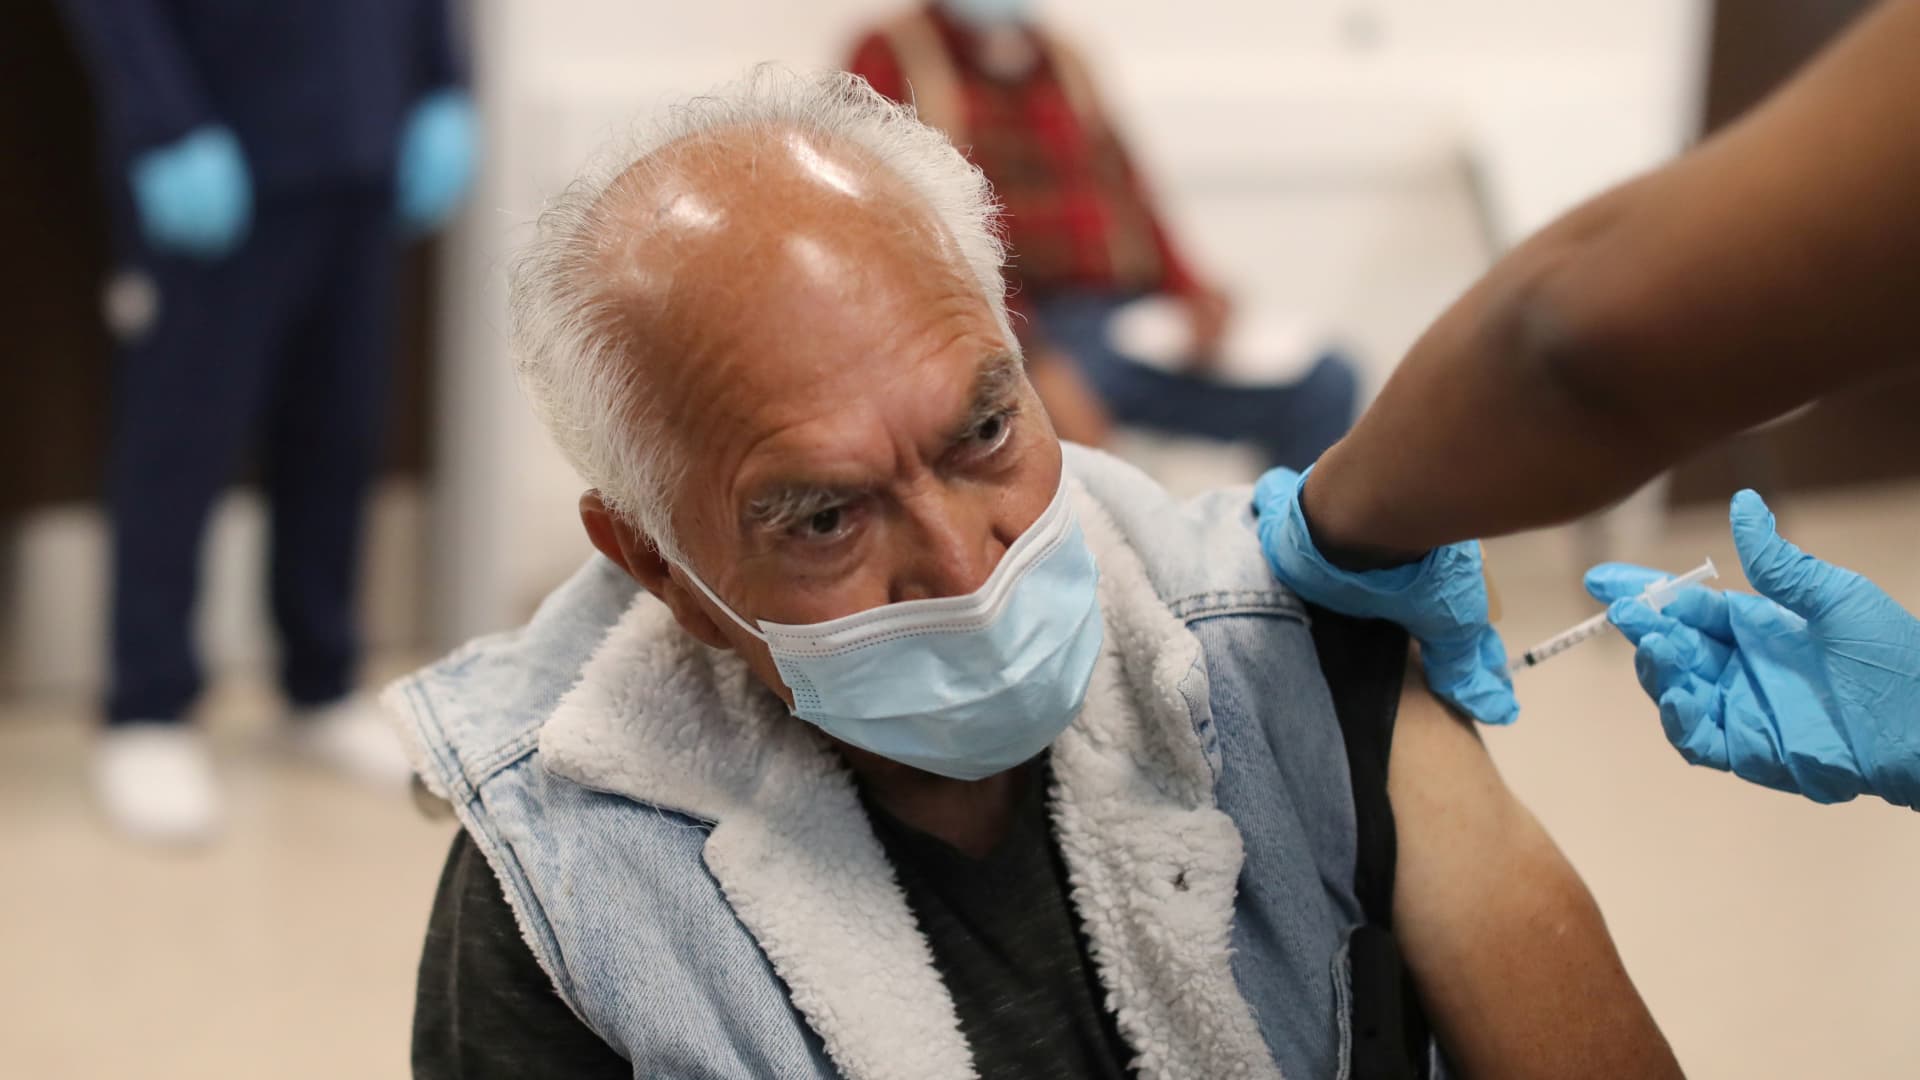 Jose Luis Hermosillo, 78, is given a coronavirus disease (COVID-19) vaccination at Martin Luther King Jr. Community Hospital in Willowbrook, Los Angeles, California, February 25, 2021.